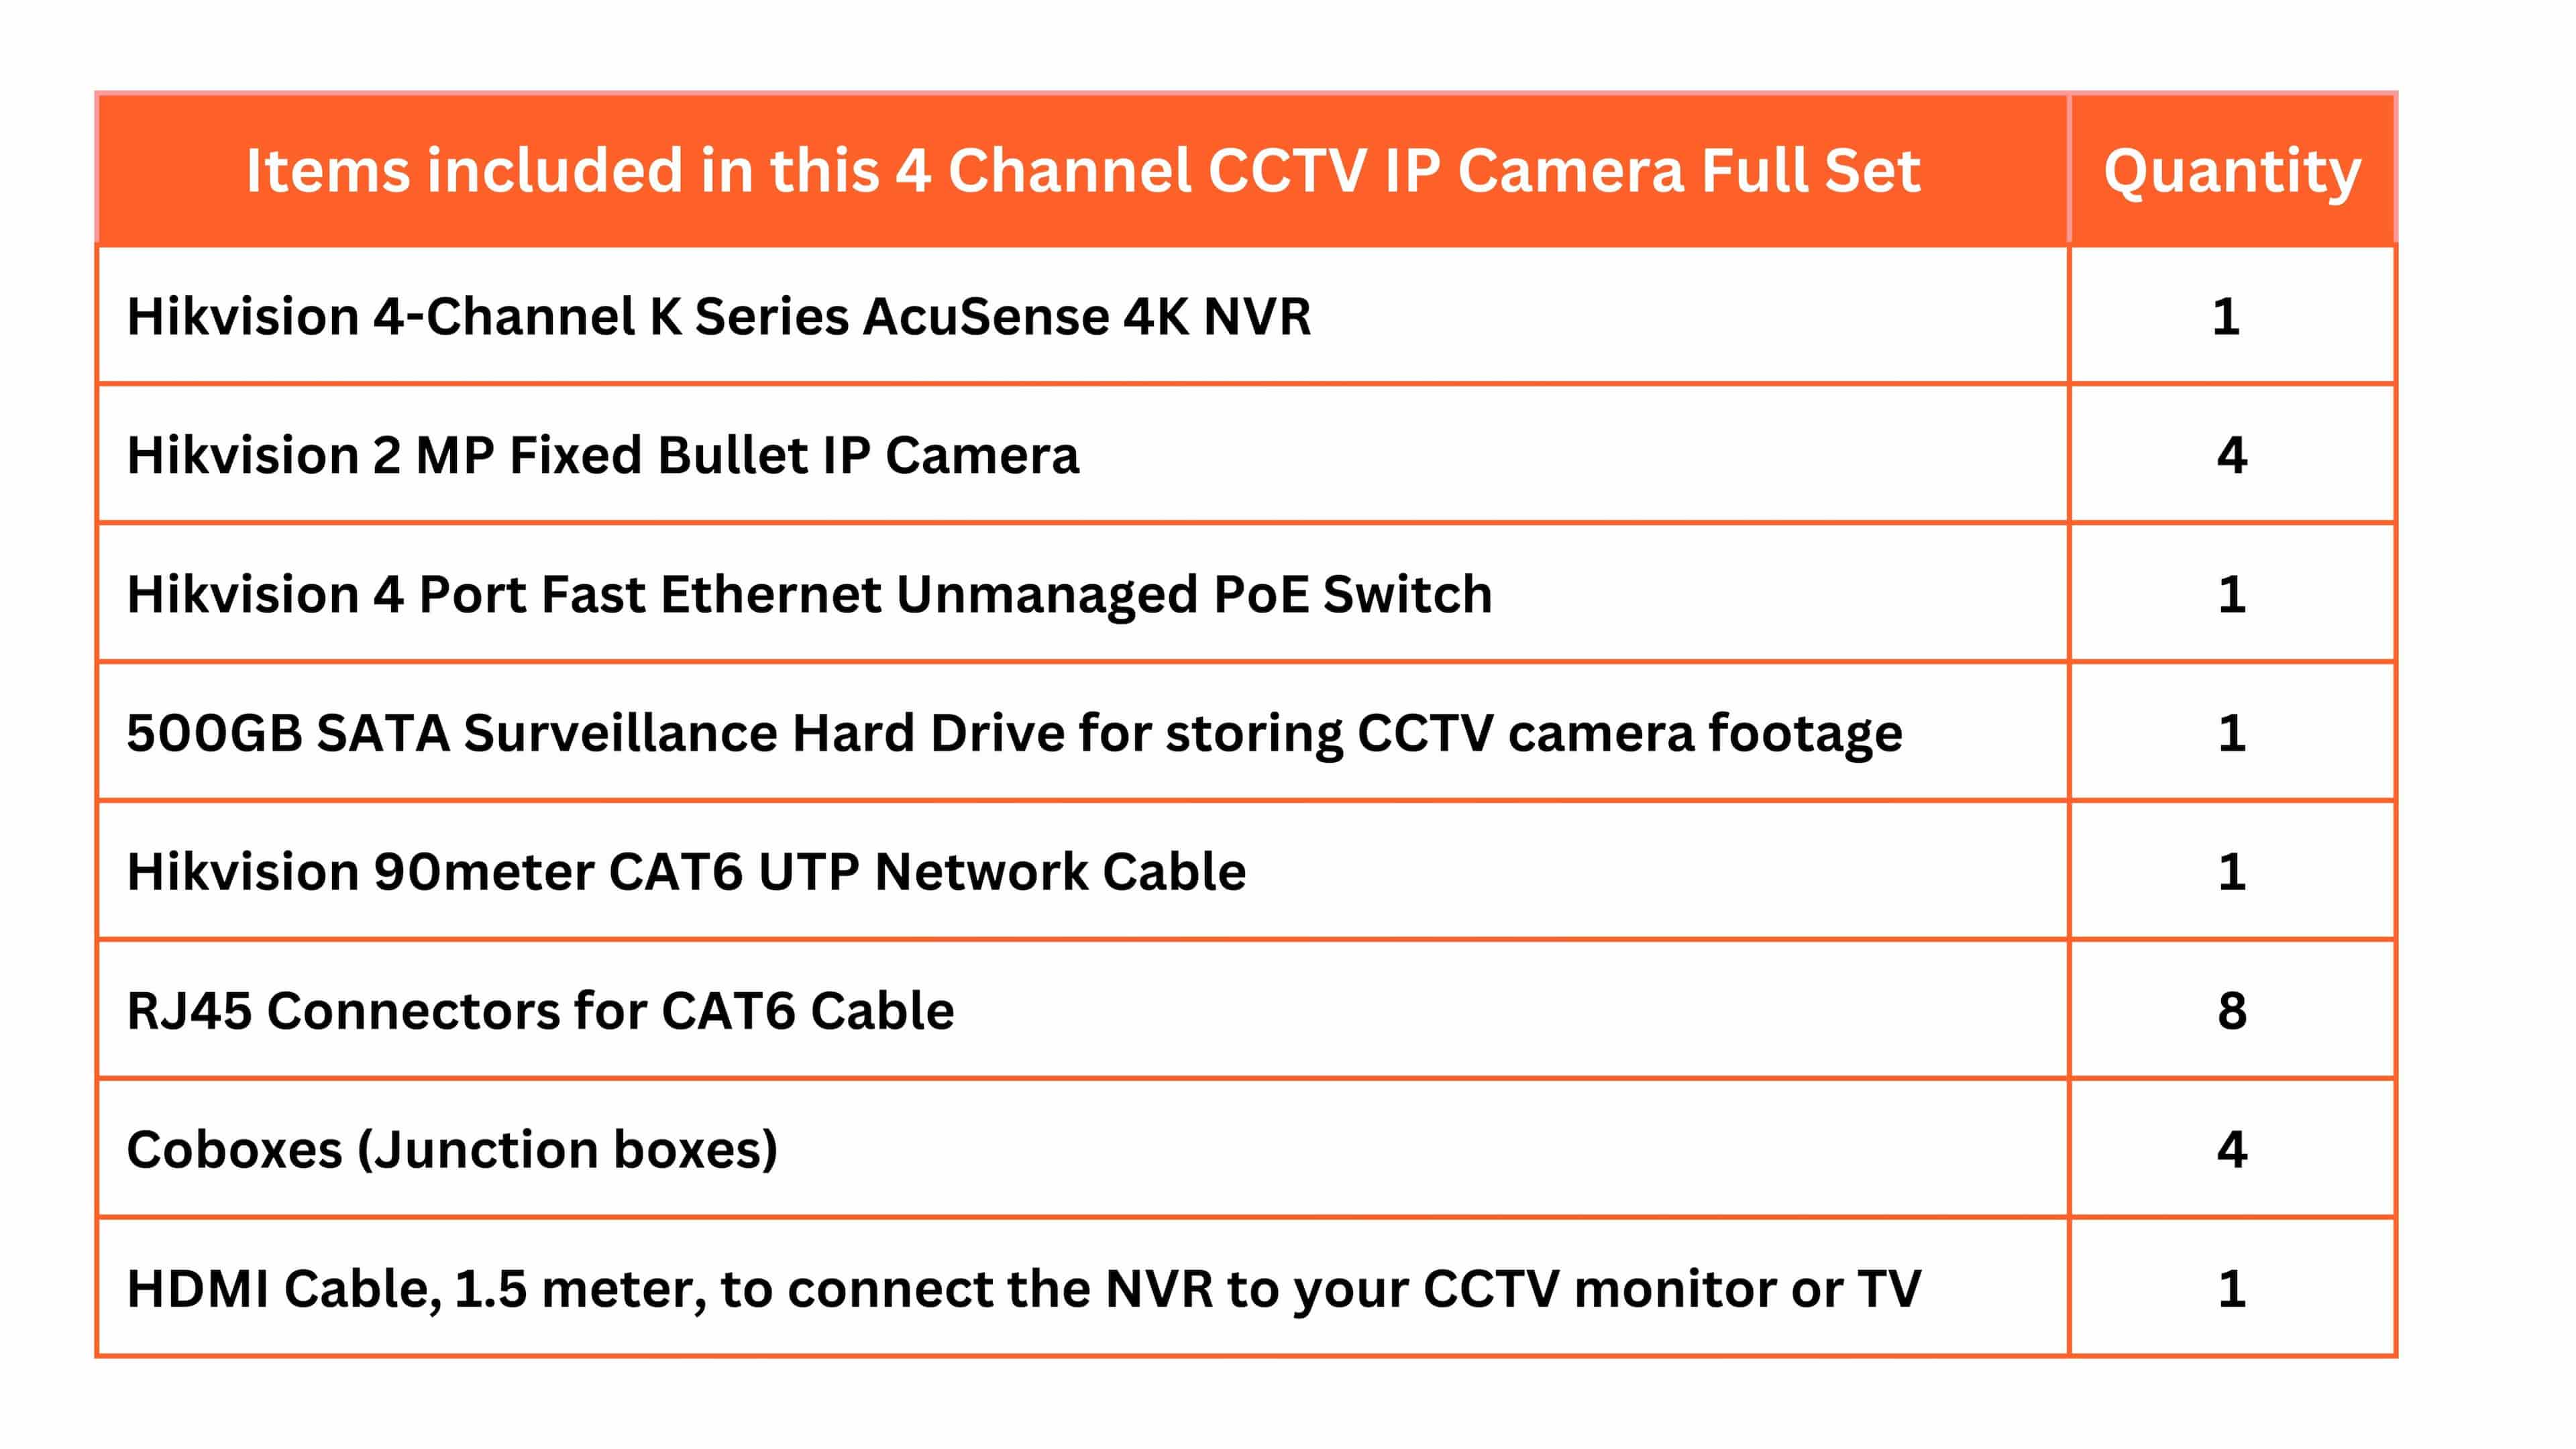 HIKVISION 4 CCTV IP Camera Full Set with 4 Channel 4K NVR, 4x 2MP Bullet IP Cameras, 4 Port PoE Switch, 500GB HDD, RJ45, Cobox, Cat6 90m & HDMI Cables